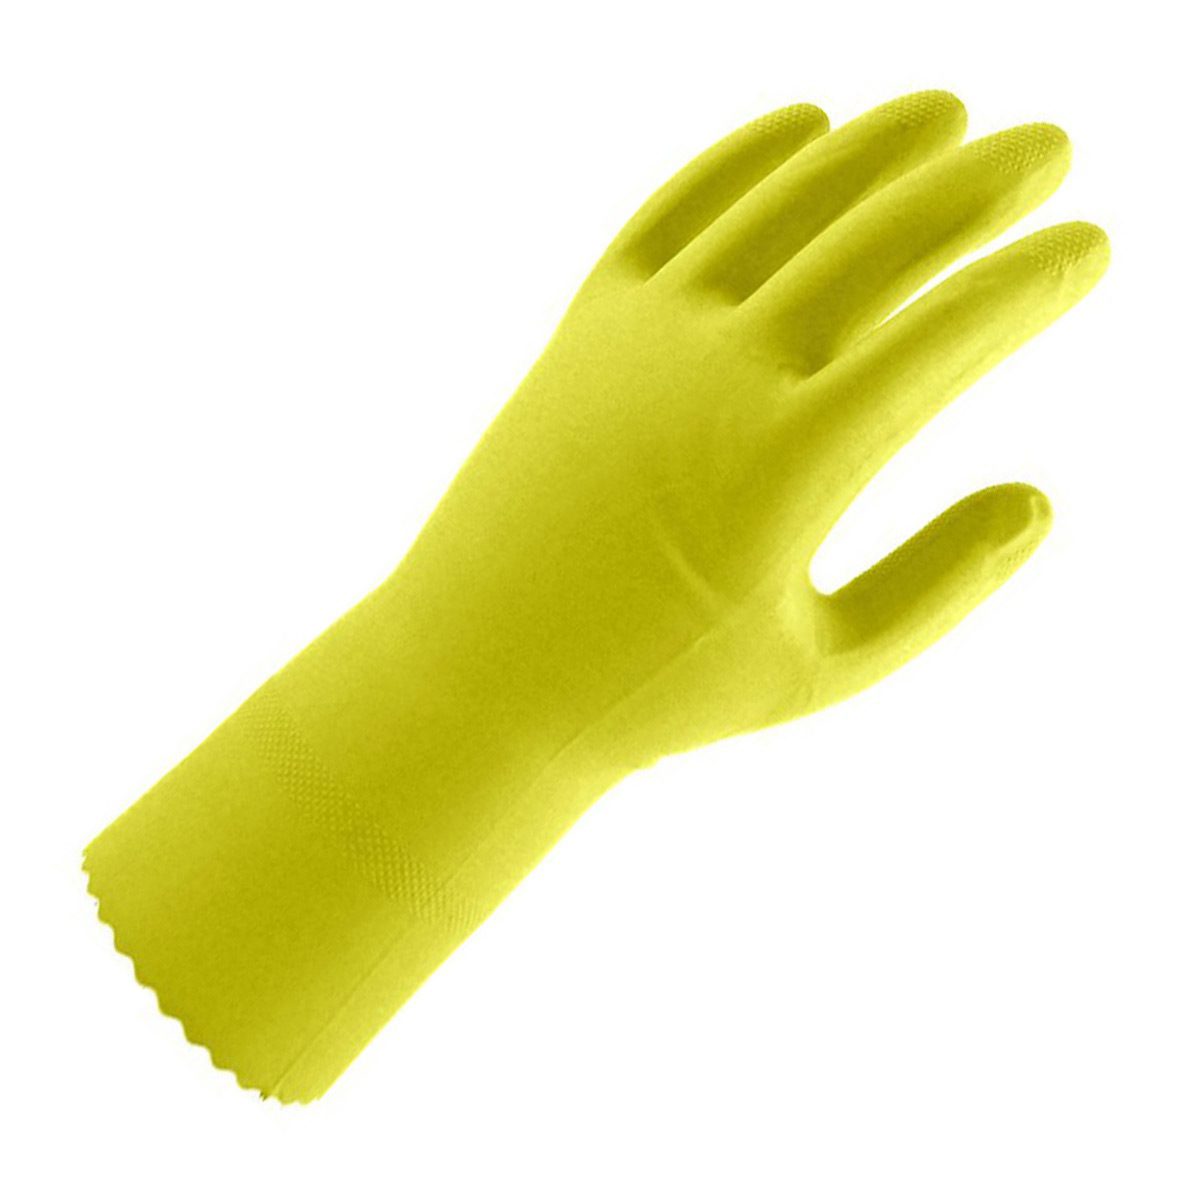 consumables-hospitality-gloves-medium-rubber-gloves-1xpair-silver-lined-2-vjs-distributors-GLOVERM